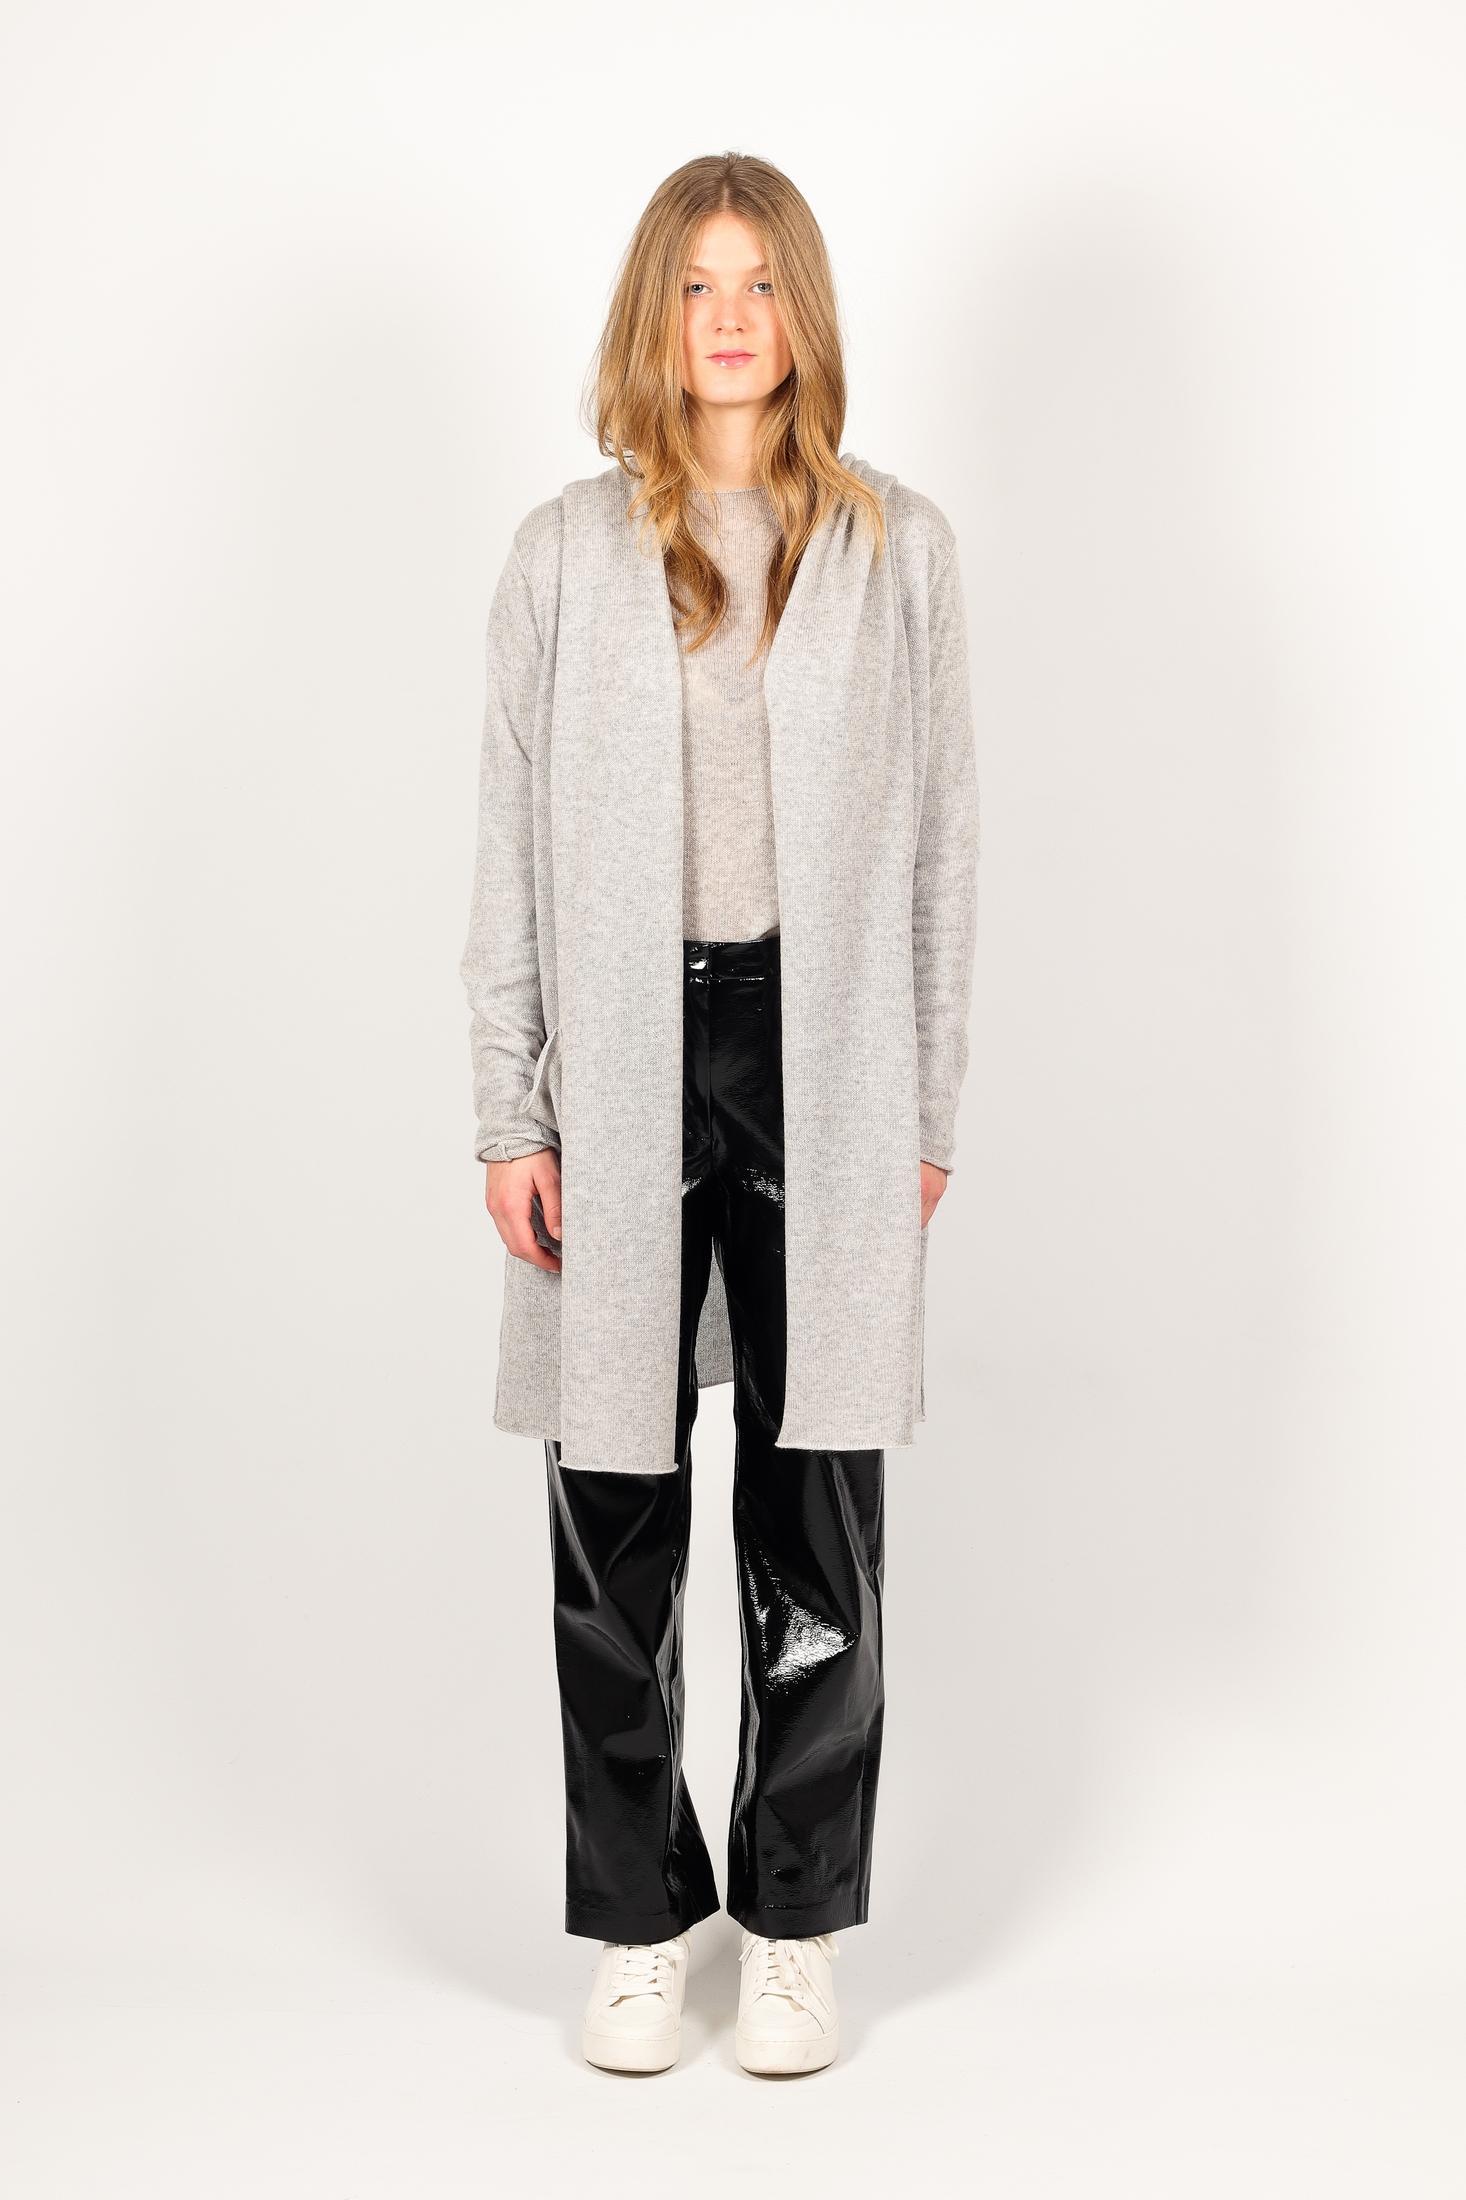 Grey womens cashmere cardigan and black pants